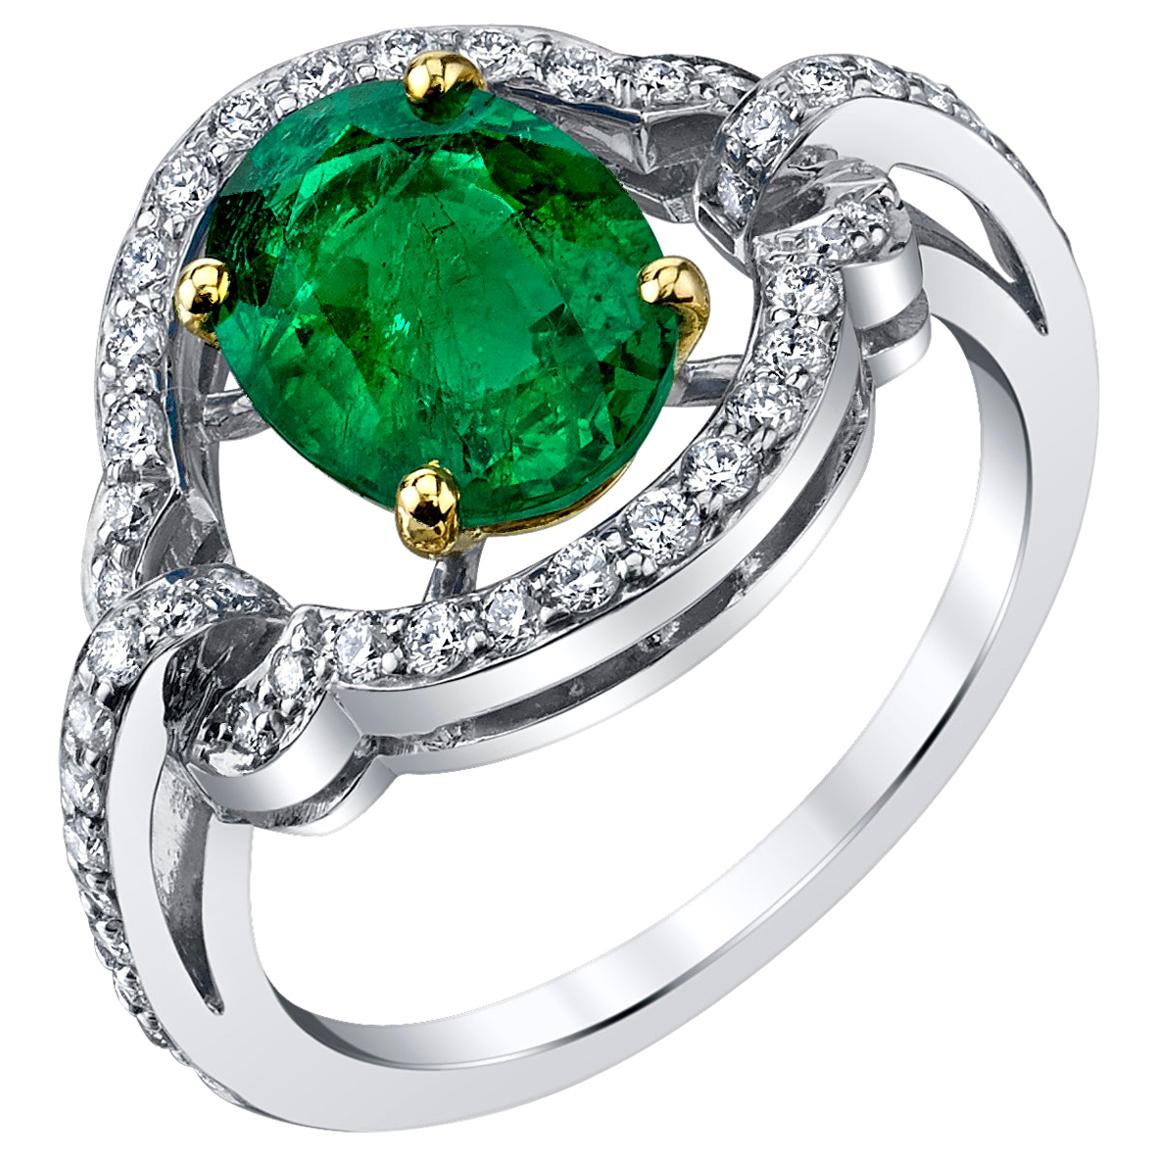 1.70 Carat Emerald and Diamond Cocktail Ring